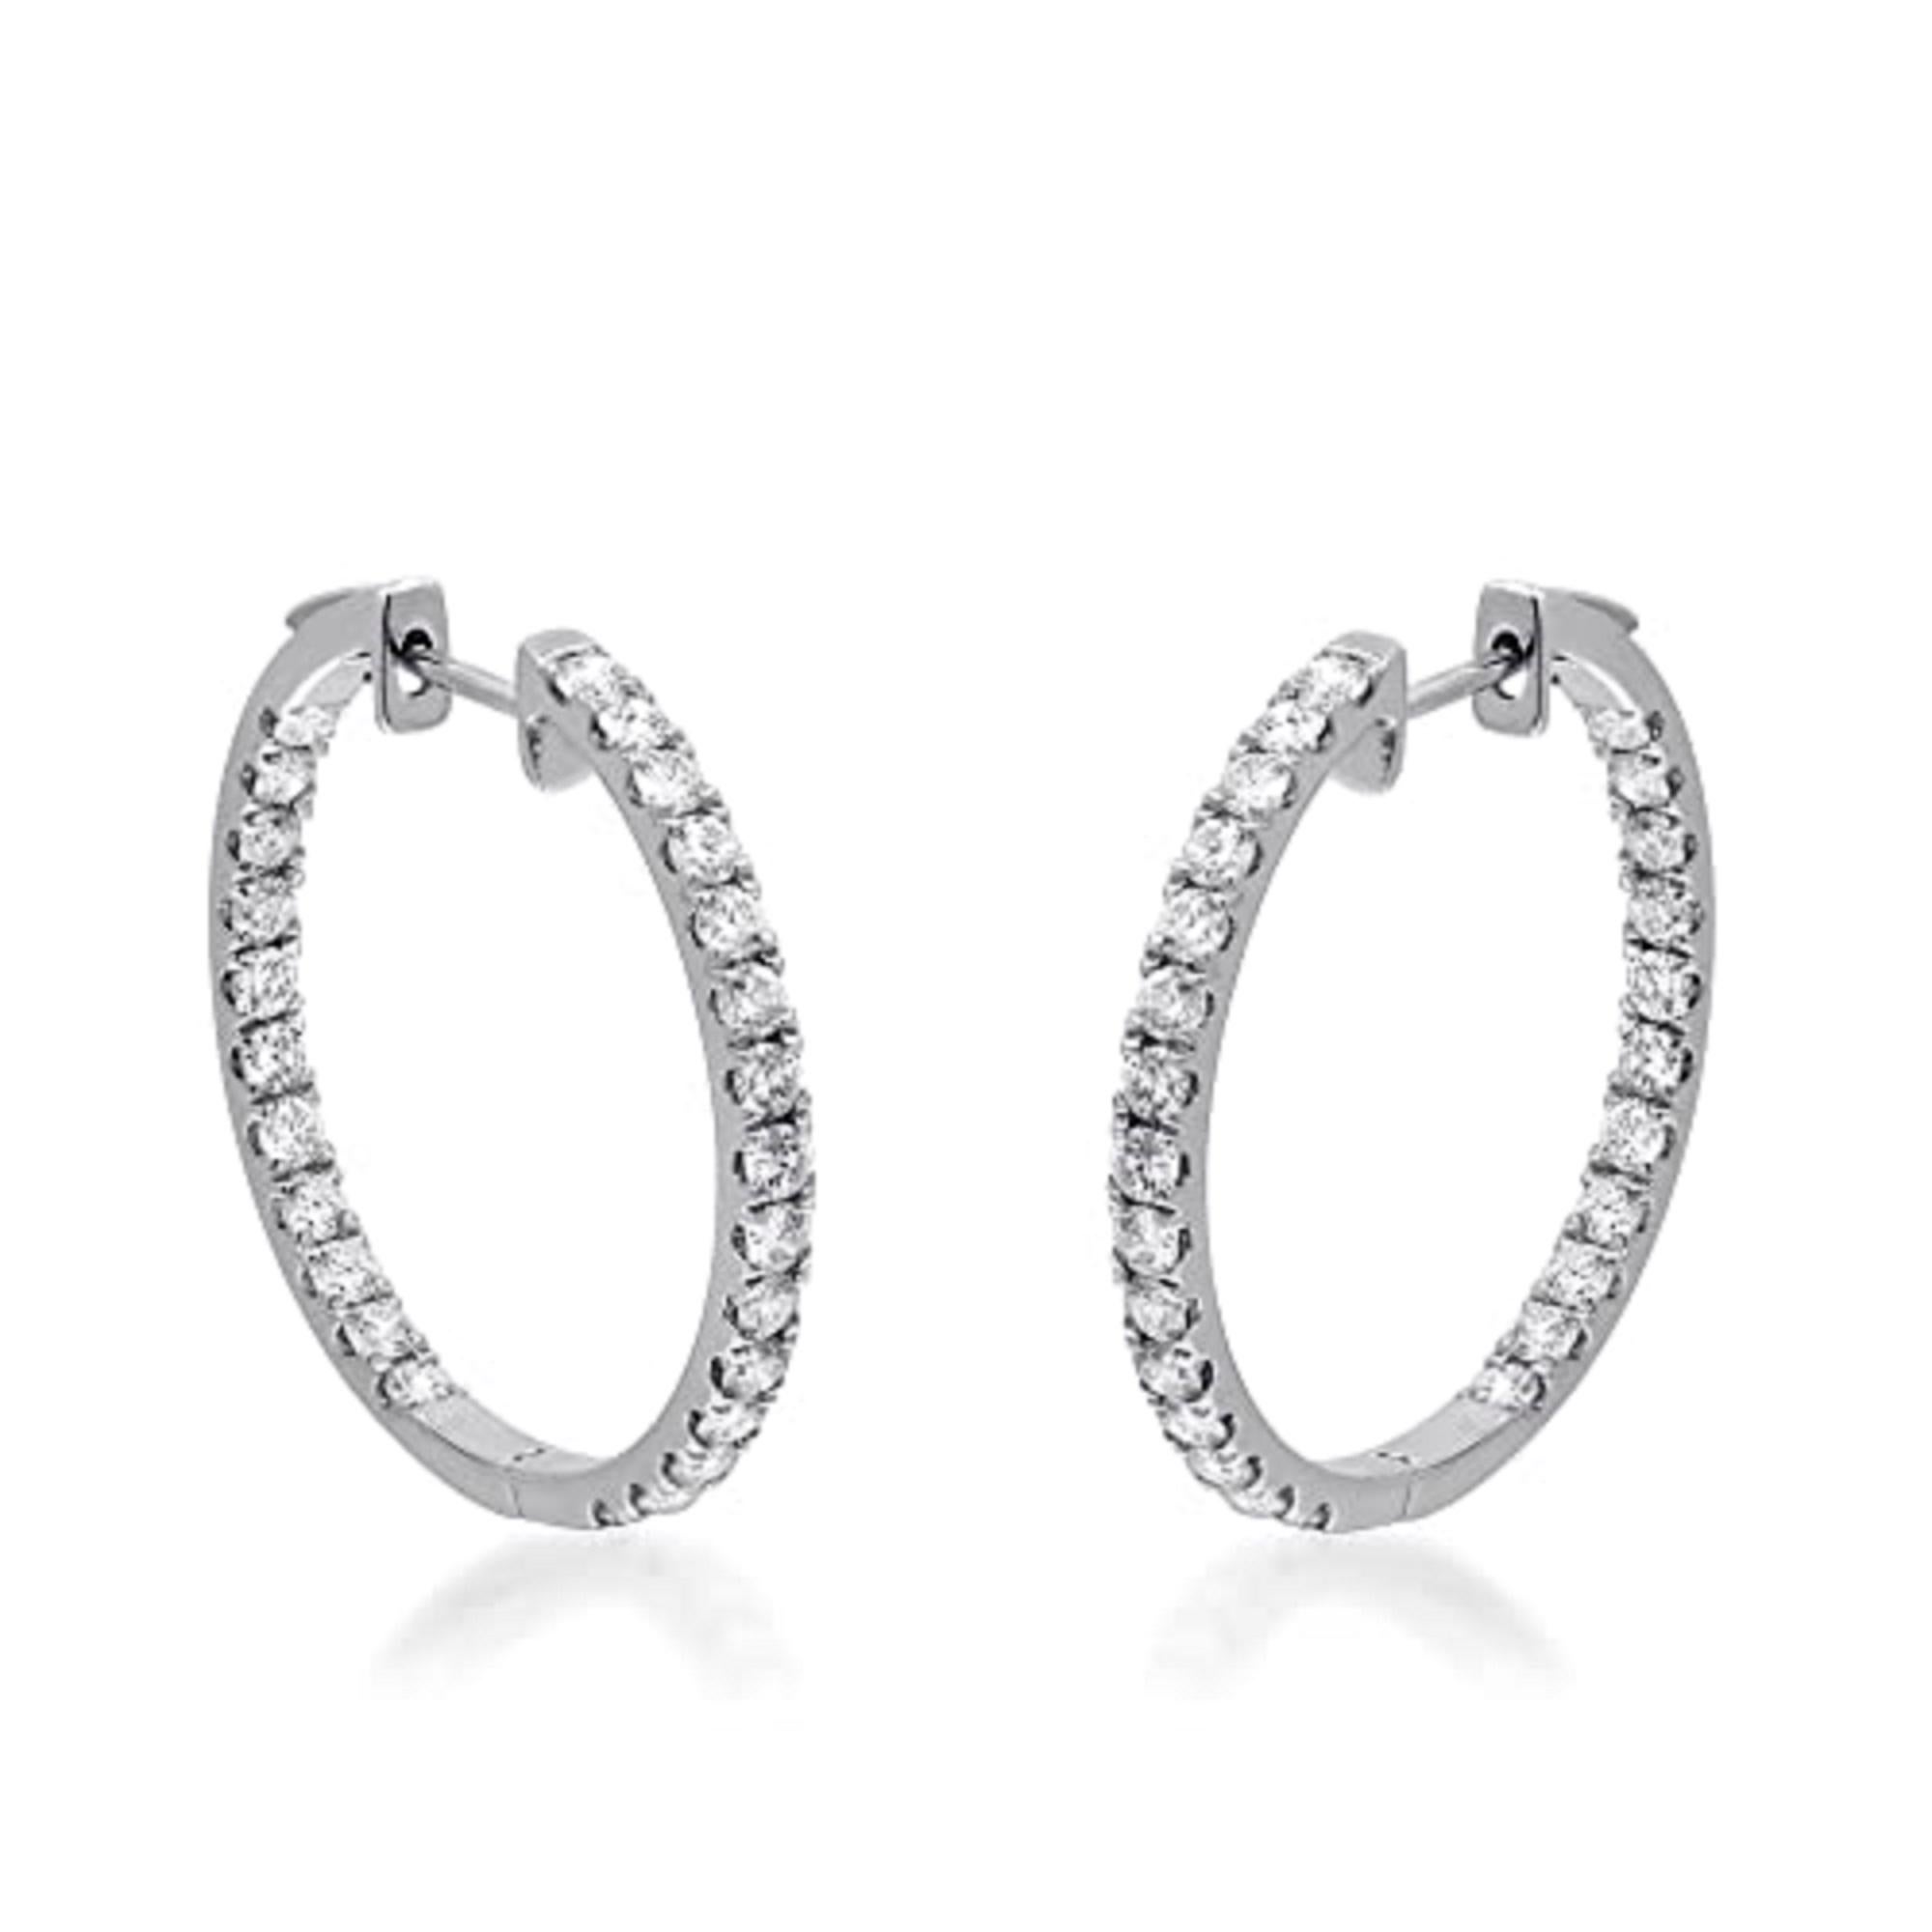 Decorate yourself in elegance with this Earring is crafted from 14-karat White Gold by Gin & Grace. This Earring is made up of Round-cut White Diamond (52 Pcs) 1.60 Carat. This Earring is weight 4.14 grams. This delicate Earring is polished to a